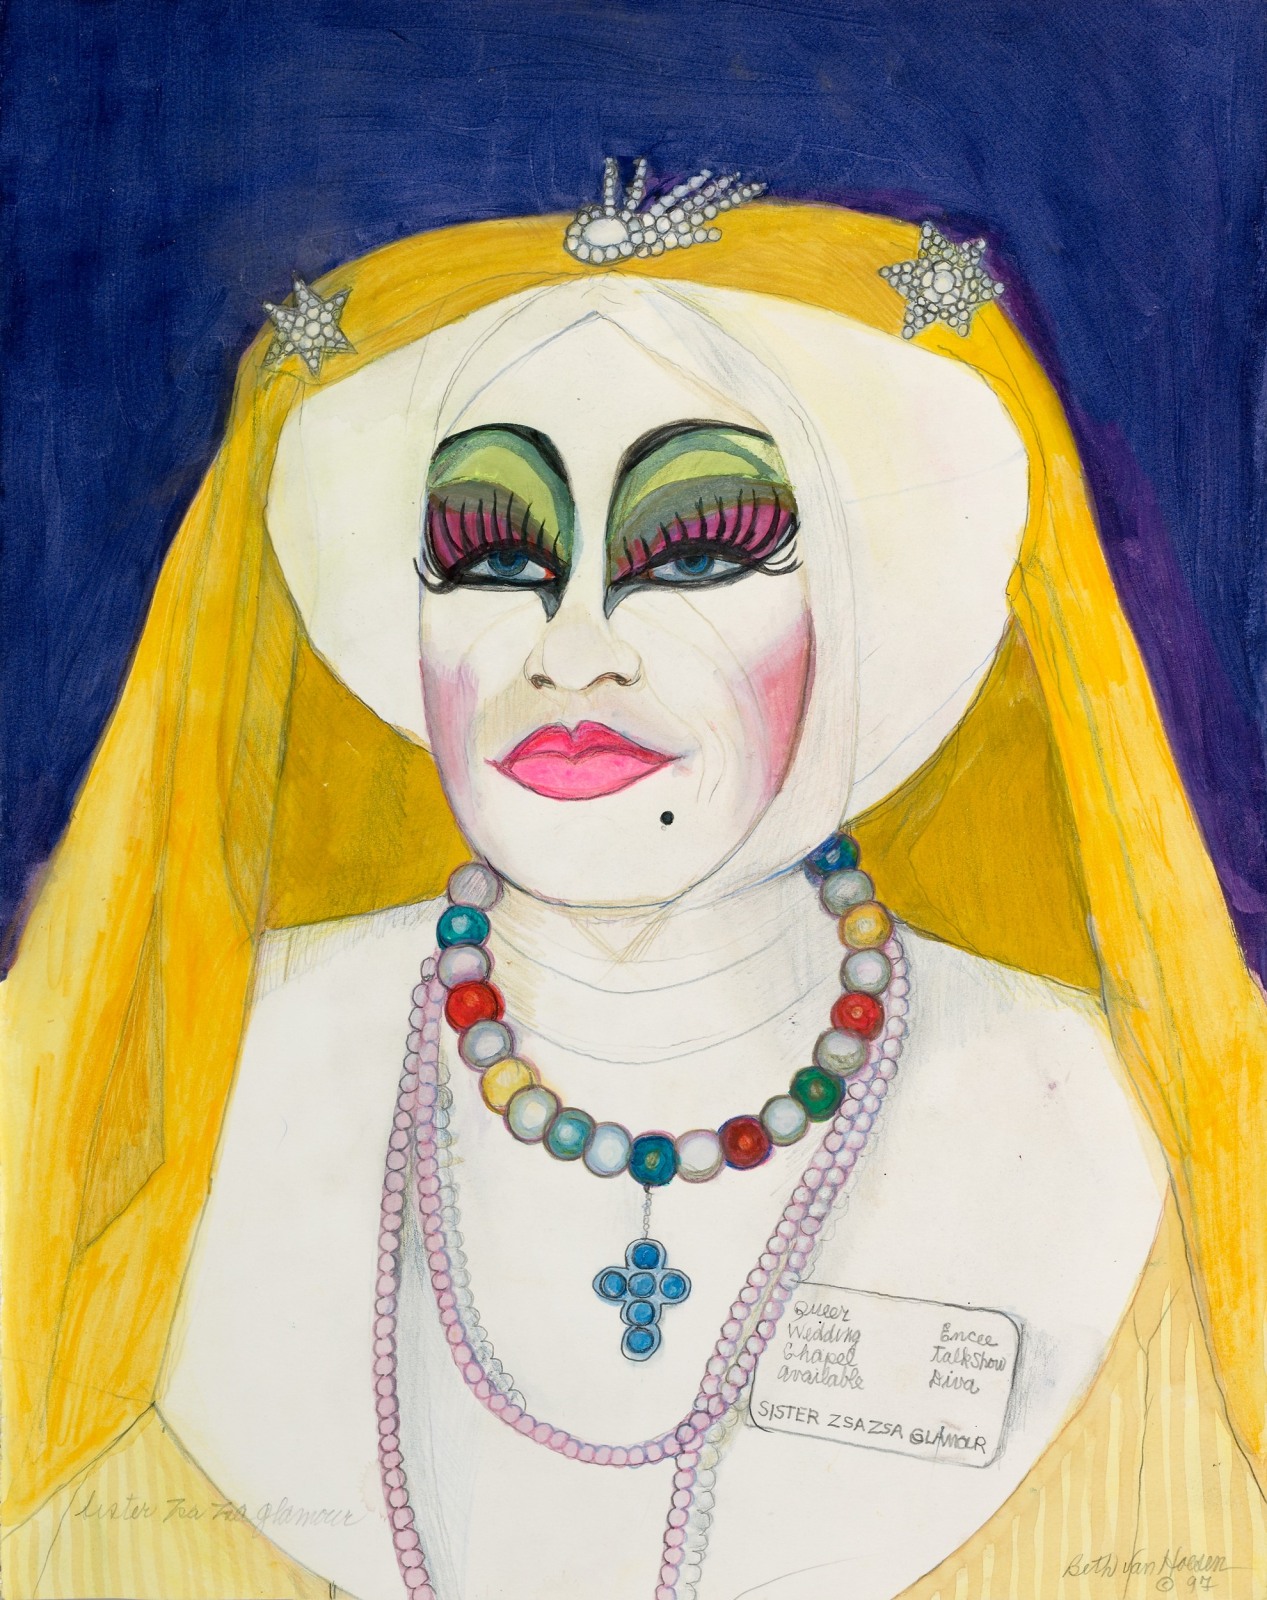 Drawing of drag queen in nun's habit with dramatic eye makeup and yellow veil